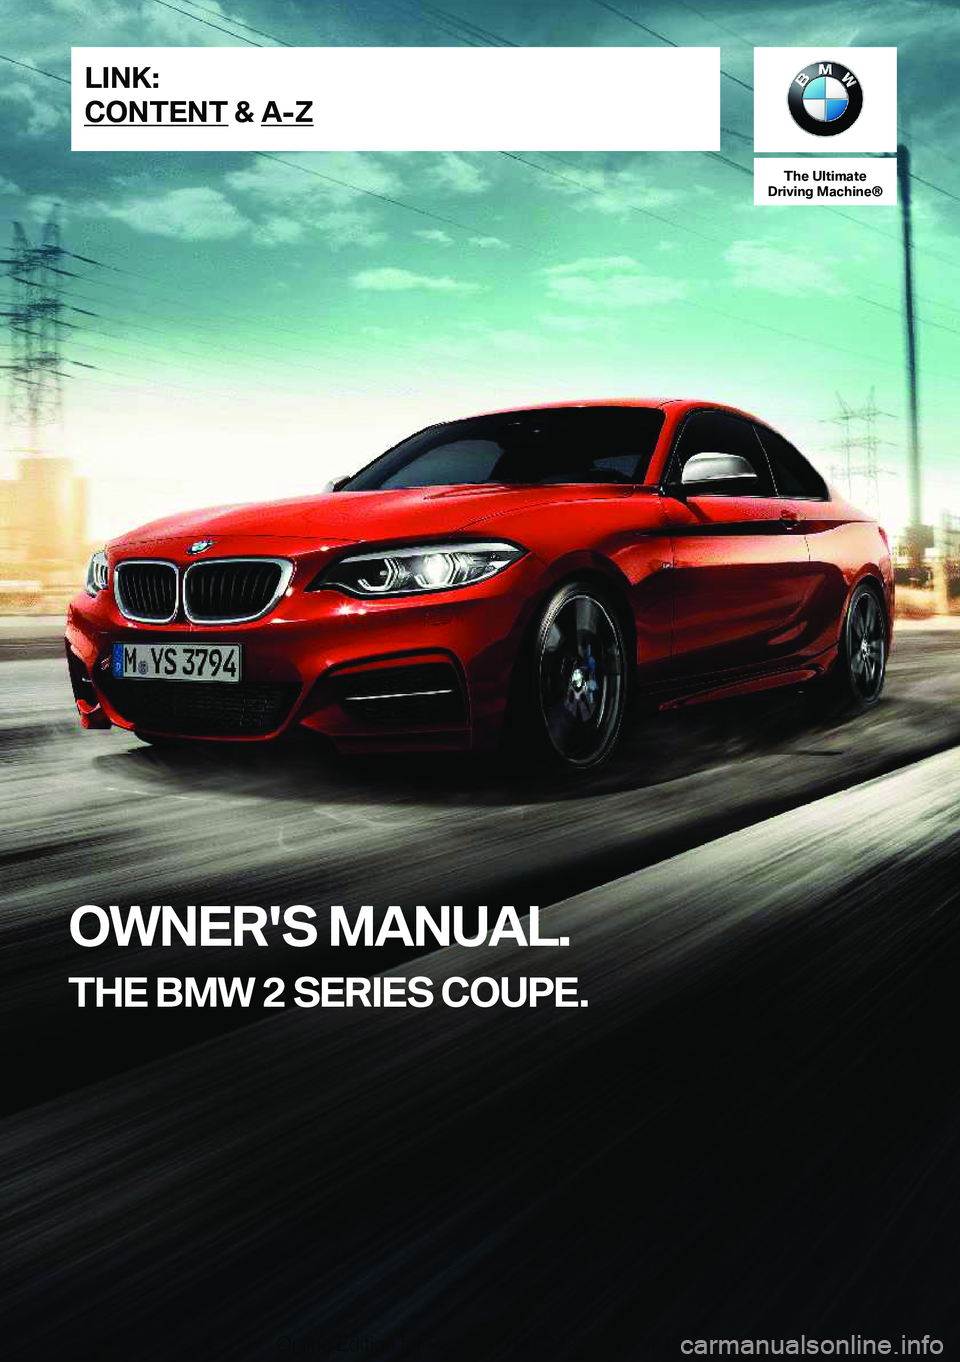 BMW 2 SERIES COUPE 2019  Owners Manual �T�h�e��U�l�t�i�m�a�t�e
�D�r�i�v�i�n�g��M�a�c�h�i�n�e�n
�O�W�N�E�R�'�S��M�A�N�U�A�L�.
�T�H�E��B�M�W��2��S�E�R�I�E�S��C�O�U�P�E�.�L�I�N�K�:
�C�O�N�T�E�N�T��&��A�-�Z�O�n�l�i�n�e��E�d�i�t�i